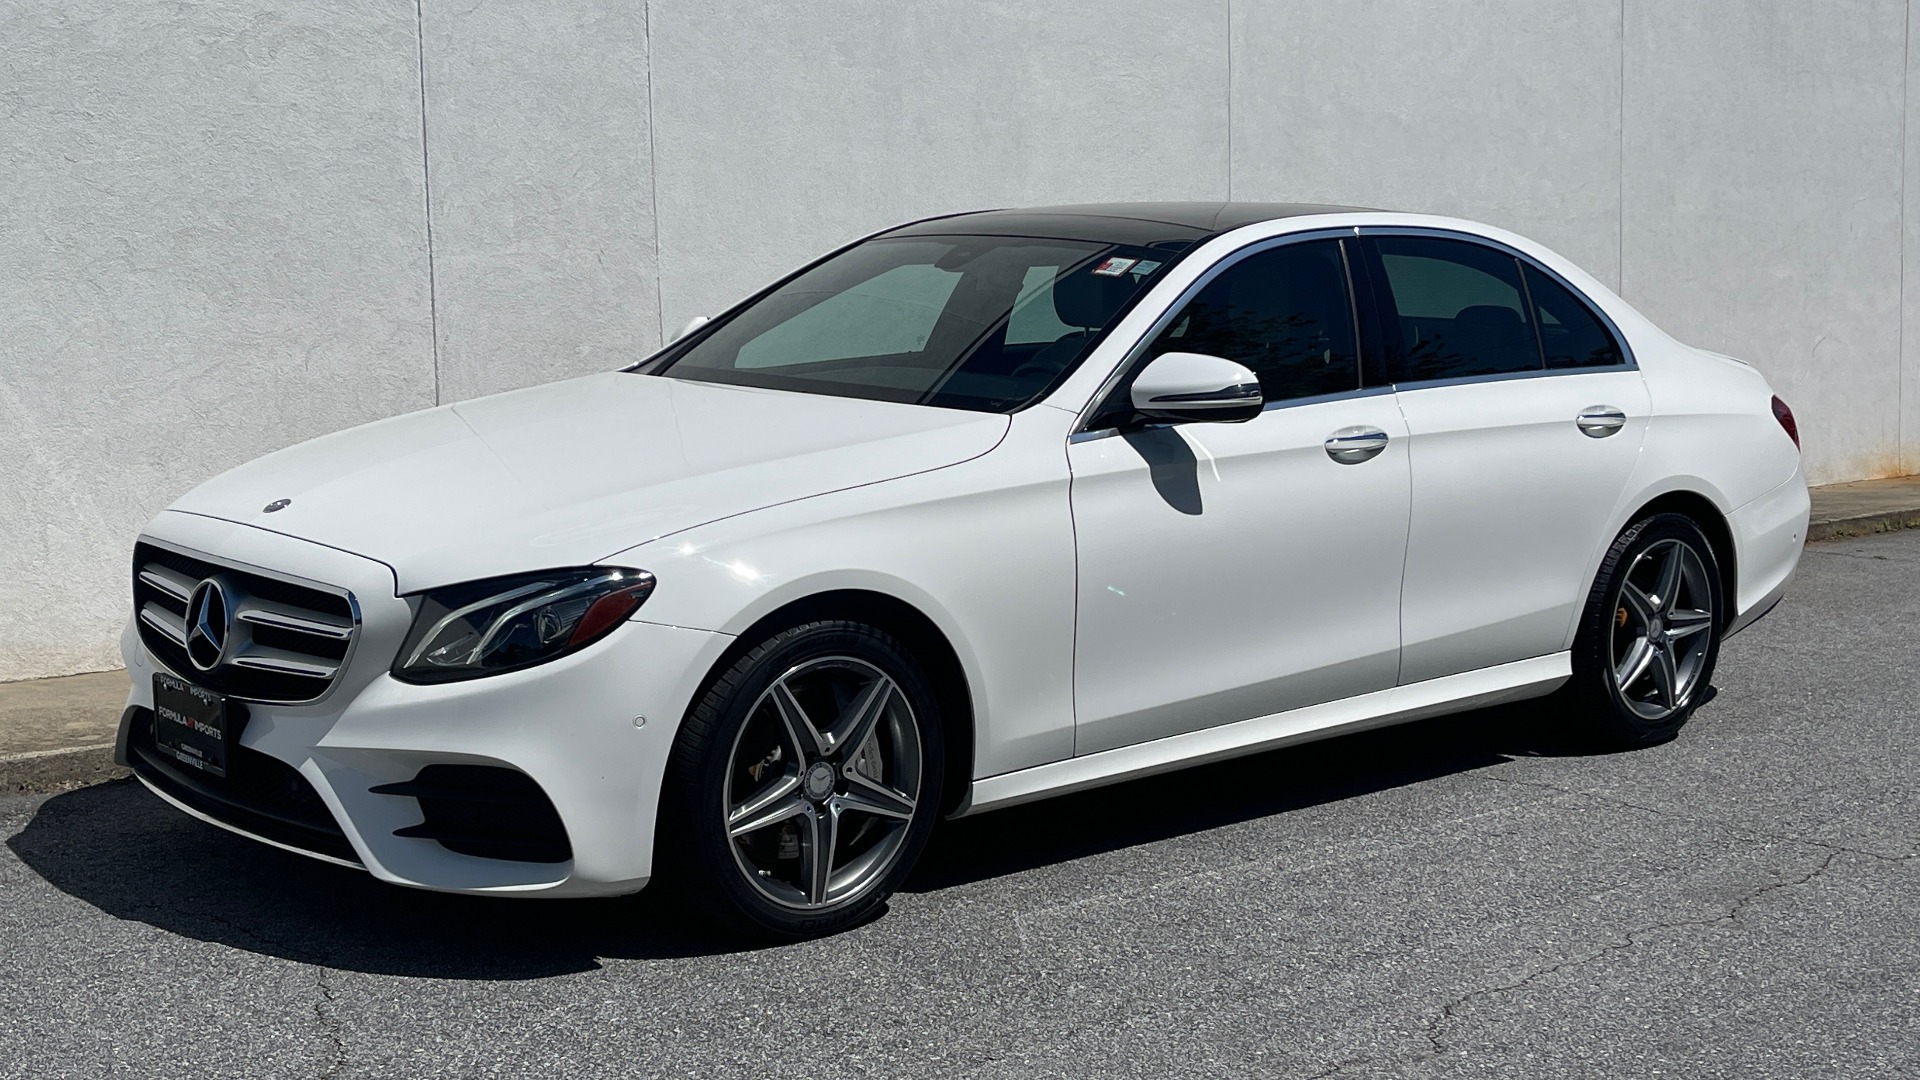 Used 2017 Mercedes-Benz E-CLASS E 300 SPORT 4MATIC SEDAN / PREMIUM / BURMESTER / PANO-ROOF for sale $32,995 at Formula Imports in Charlotte NC 28227 3